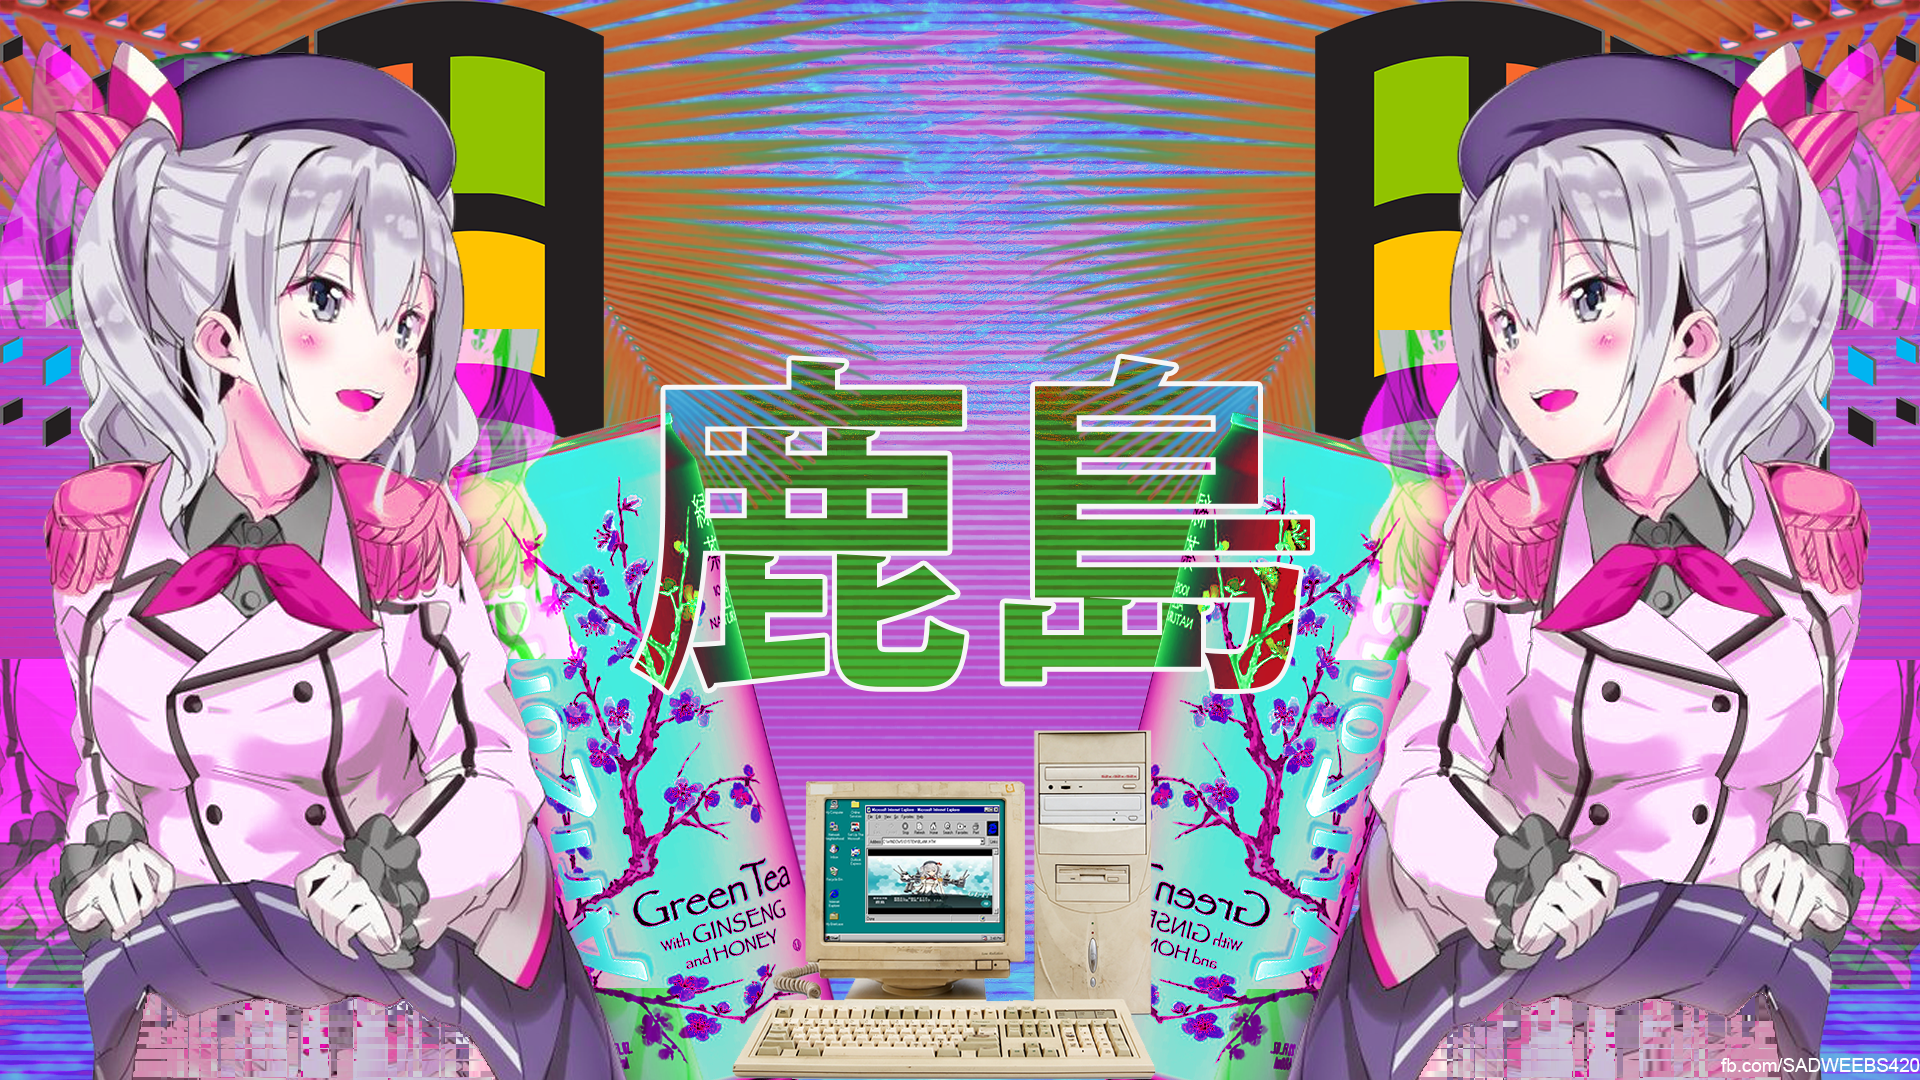 Green Anime Aesthetic Wallpapers